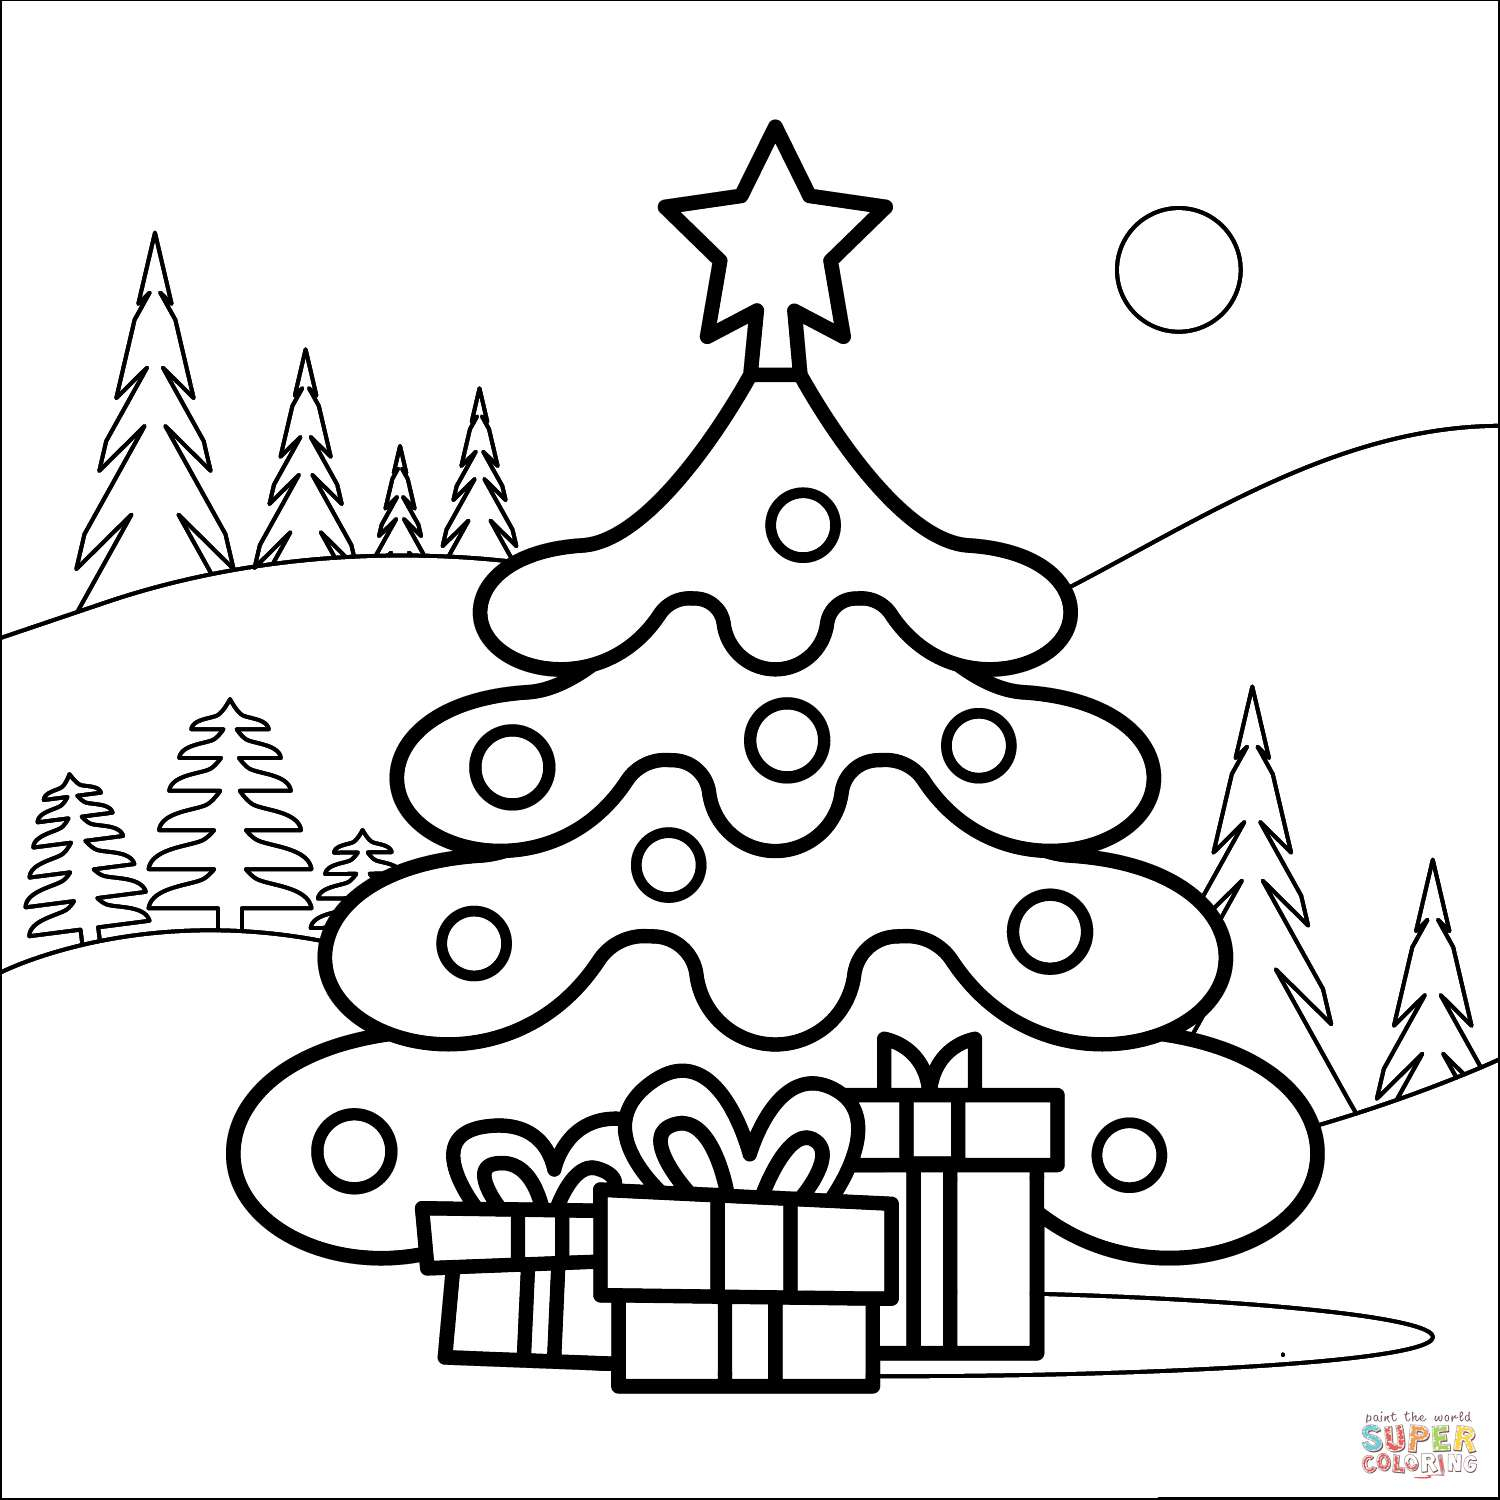 Free Christmas Tree Coloring Pages For The Kids